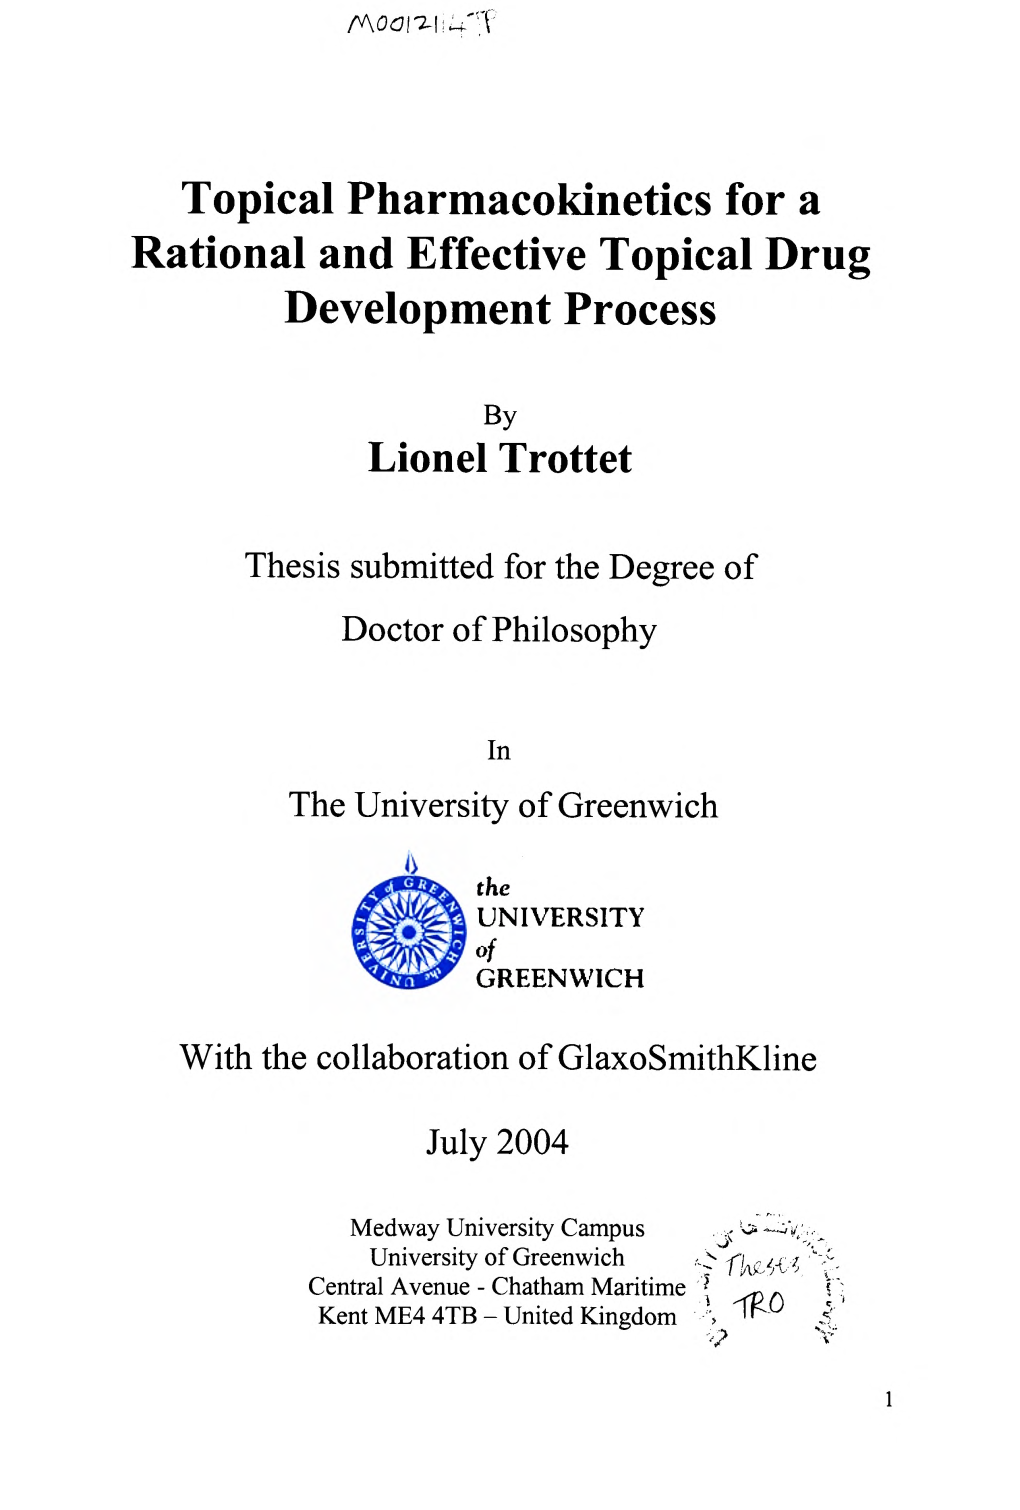 Topical Pharmacokinetics for a Rational and Effective Topical Drug Development Process